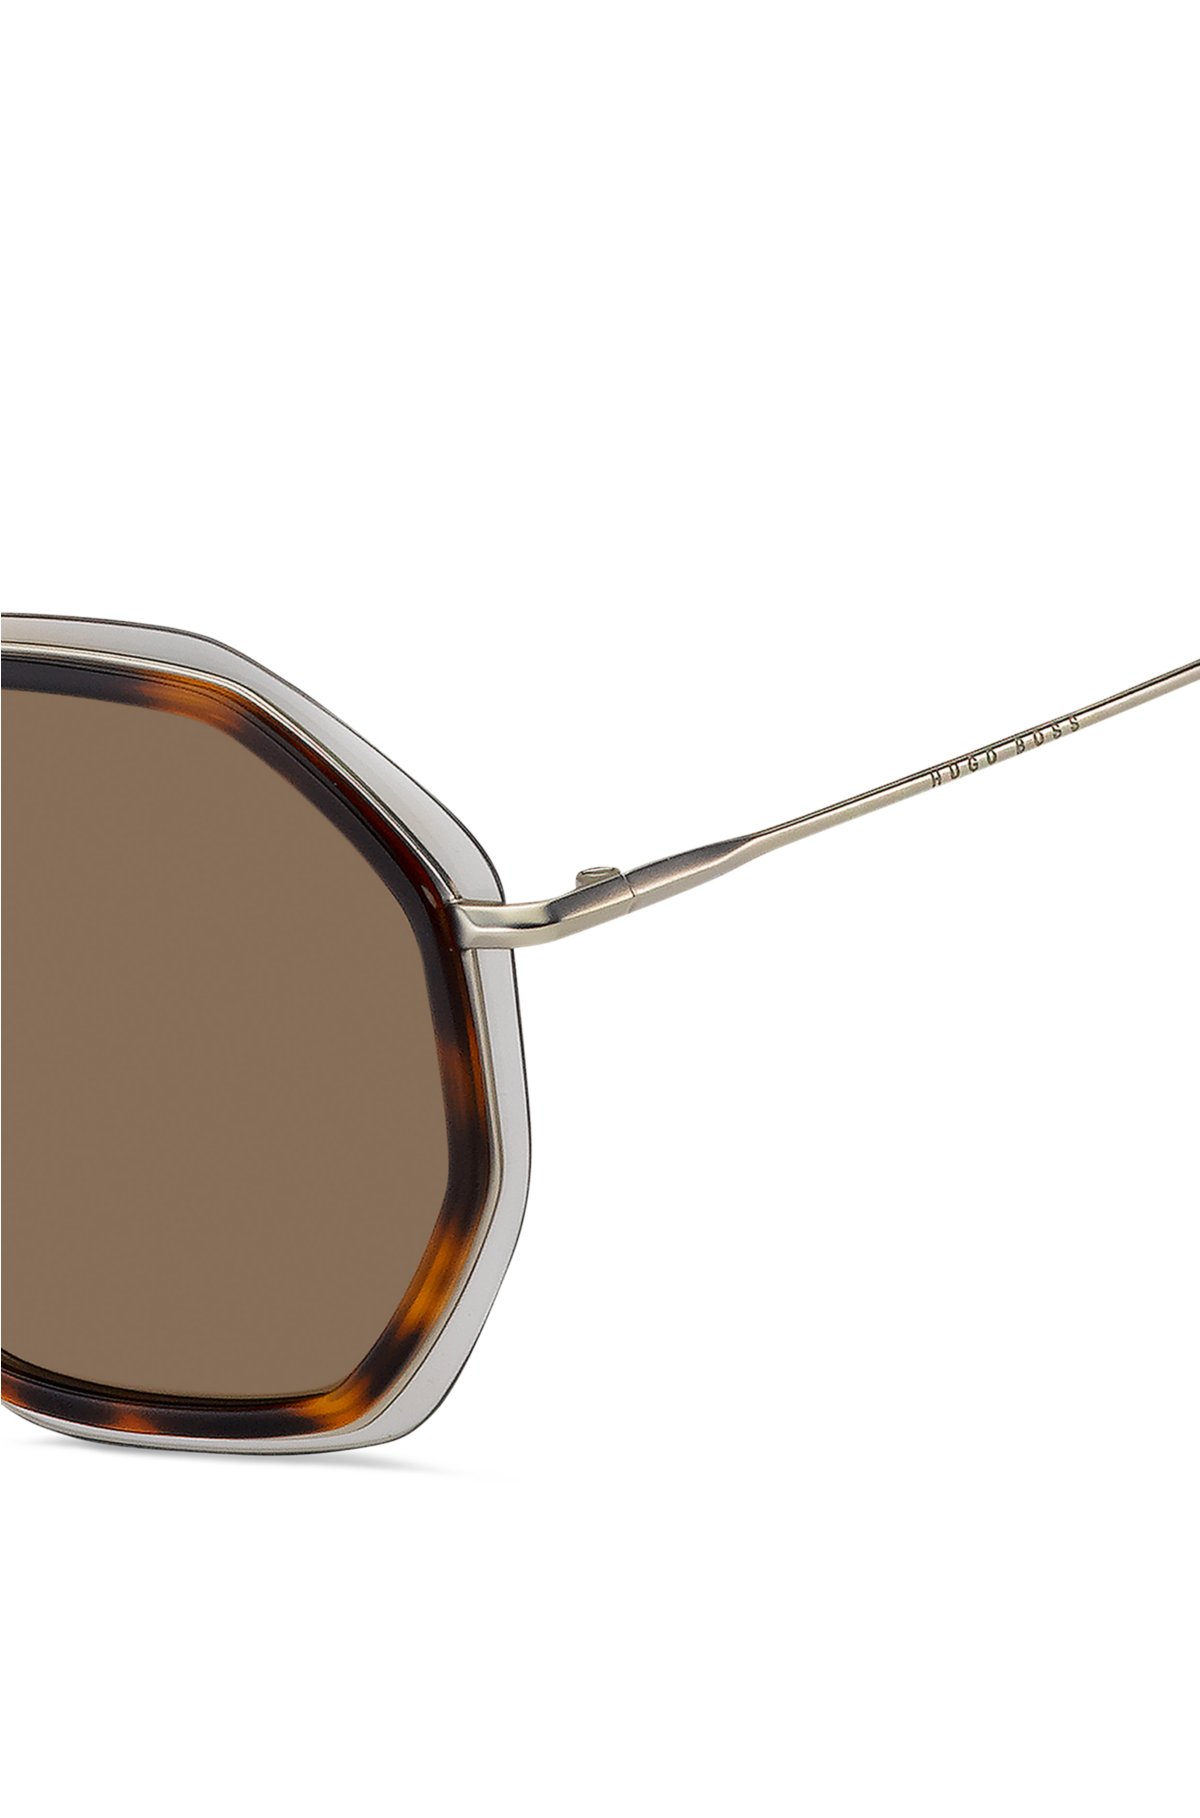 Angular sunglasses in Havana acetate with brown lenses, Brown Patterned